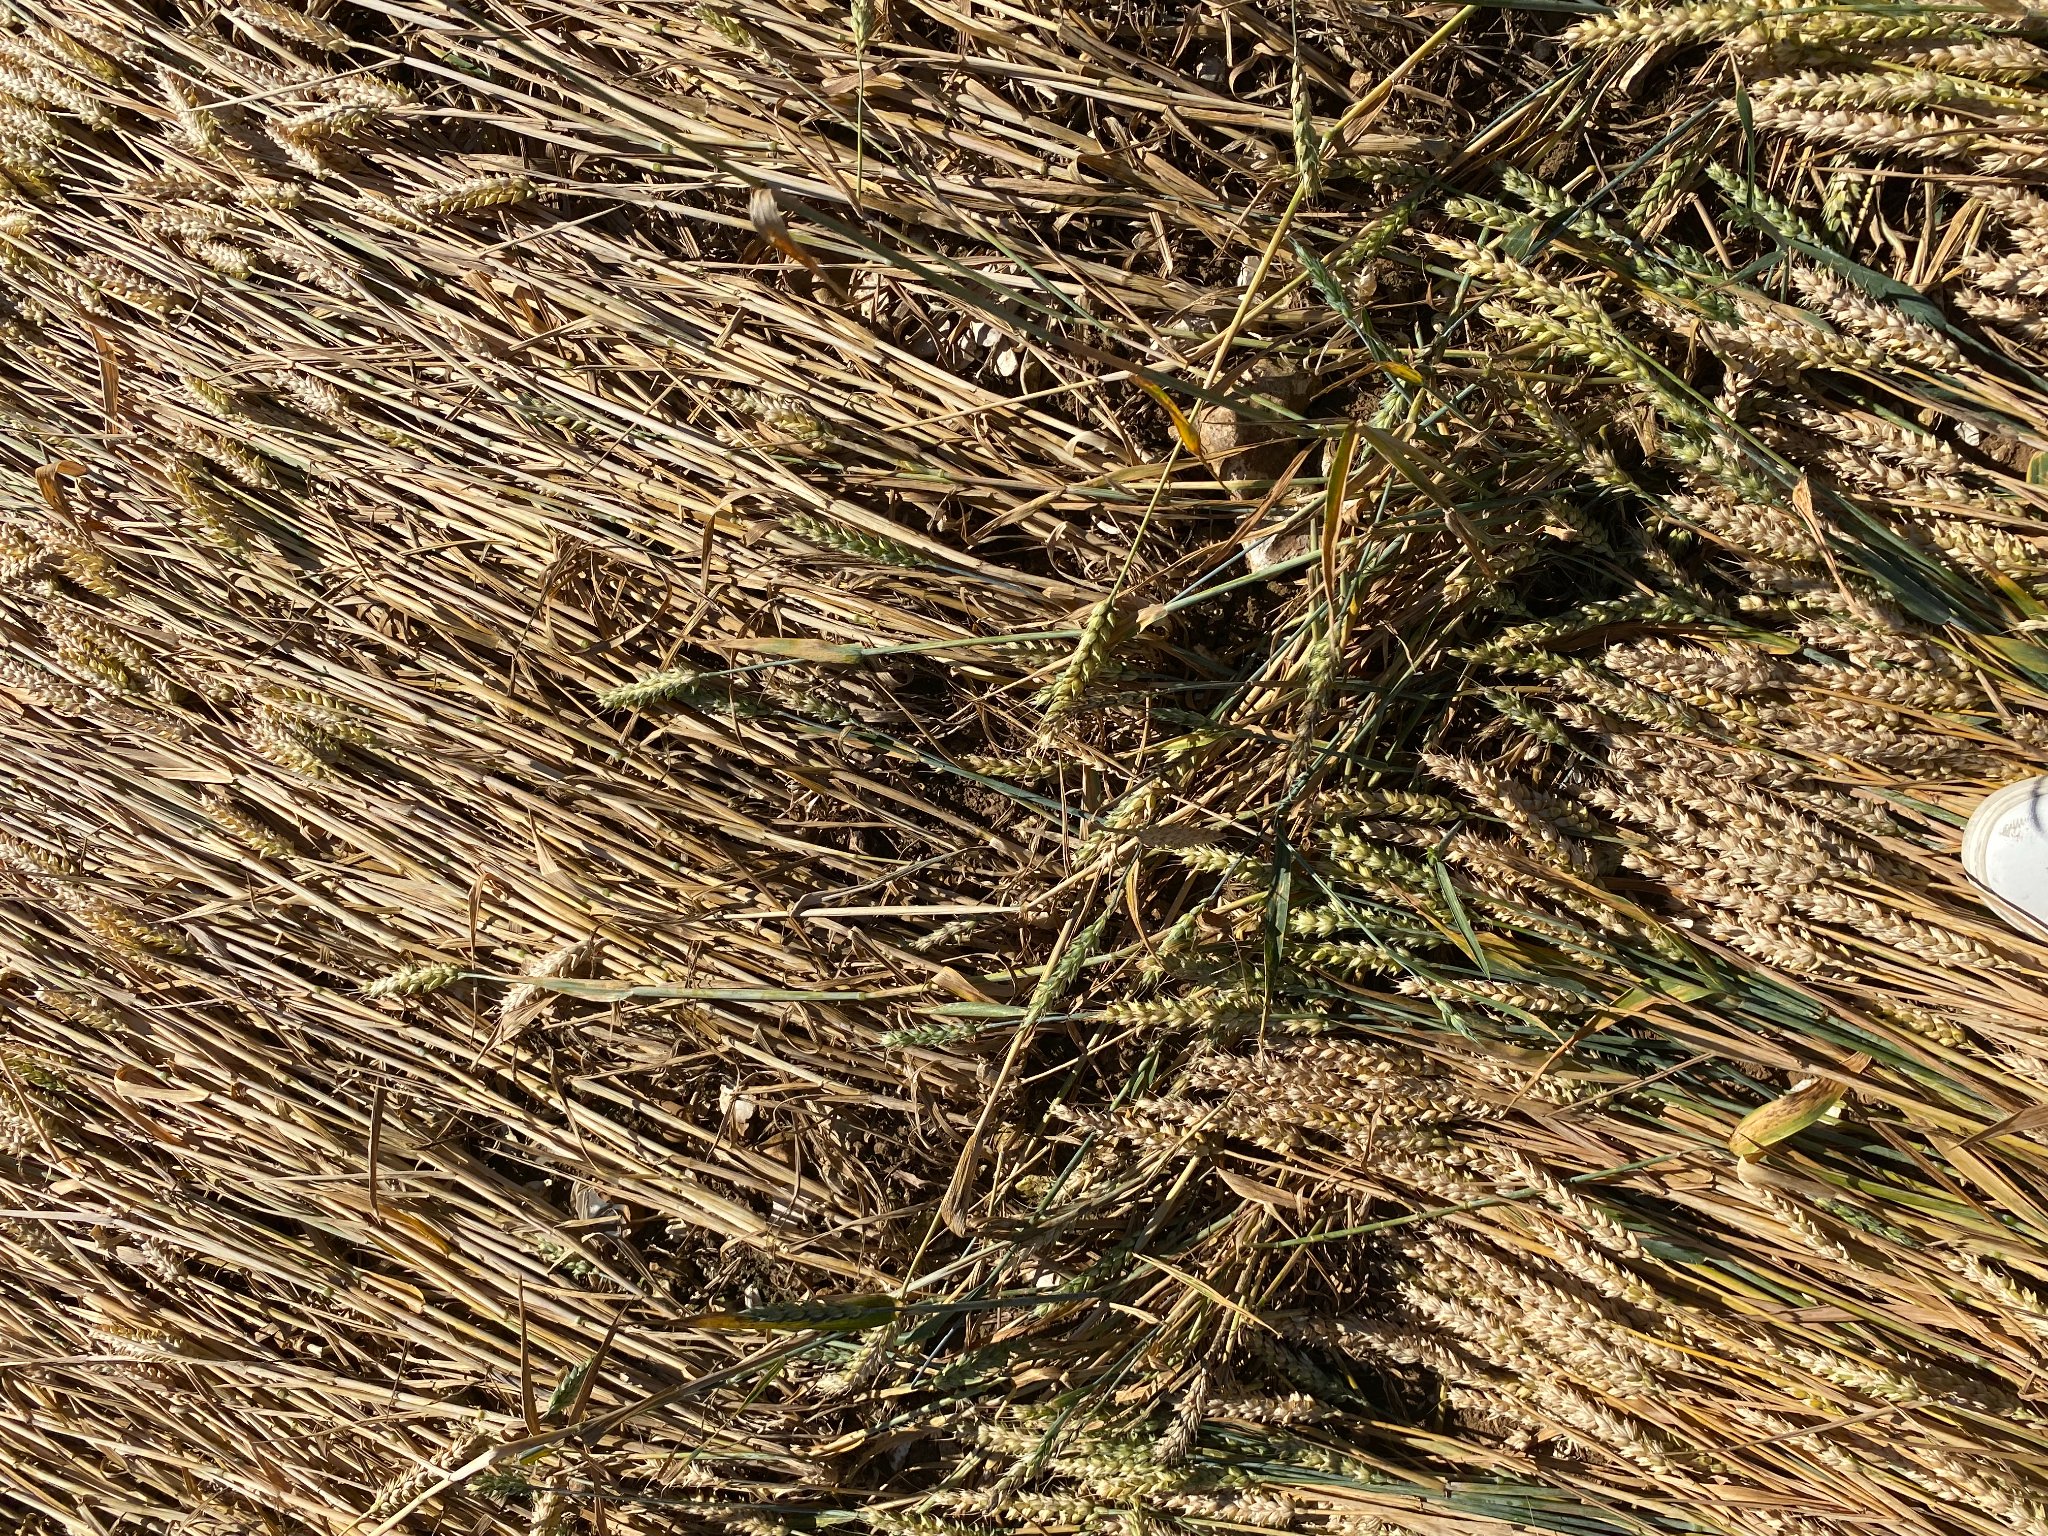 A color aerial view photograph of an up close view of flattened yellow brown wheat stalks all flattened in the same direction diagonally towards the top right of the frame. A diagonal ridge of shadow created by upright wheat stalks cuts from the top right to the bottom center of the frame. Details of each individual stalk and seeded tops are sharp.